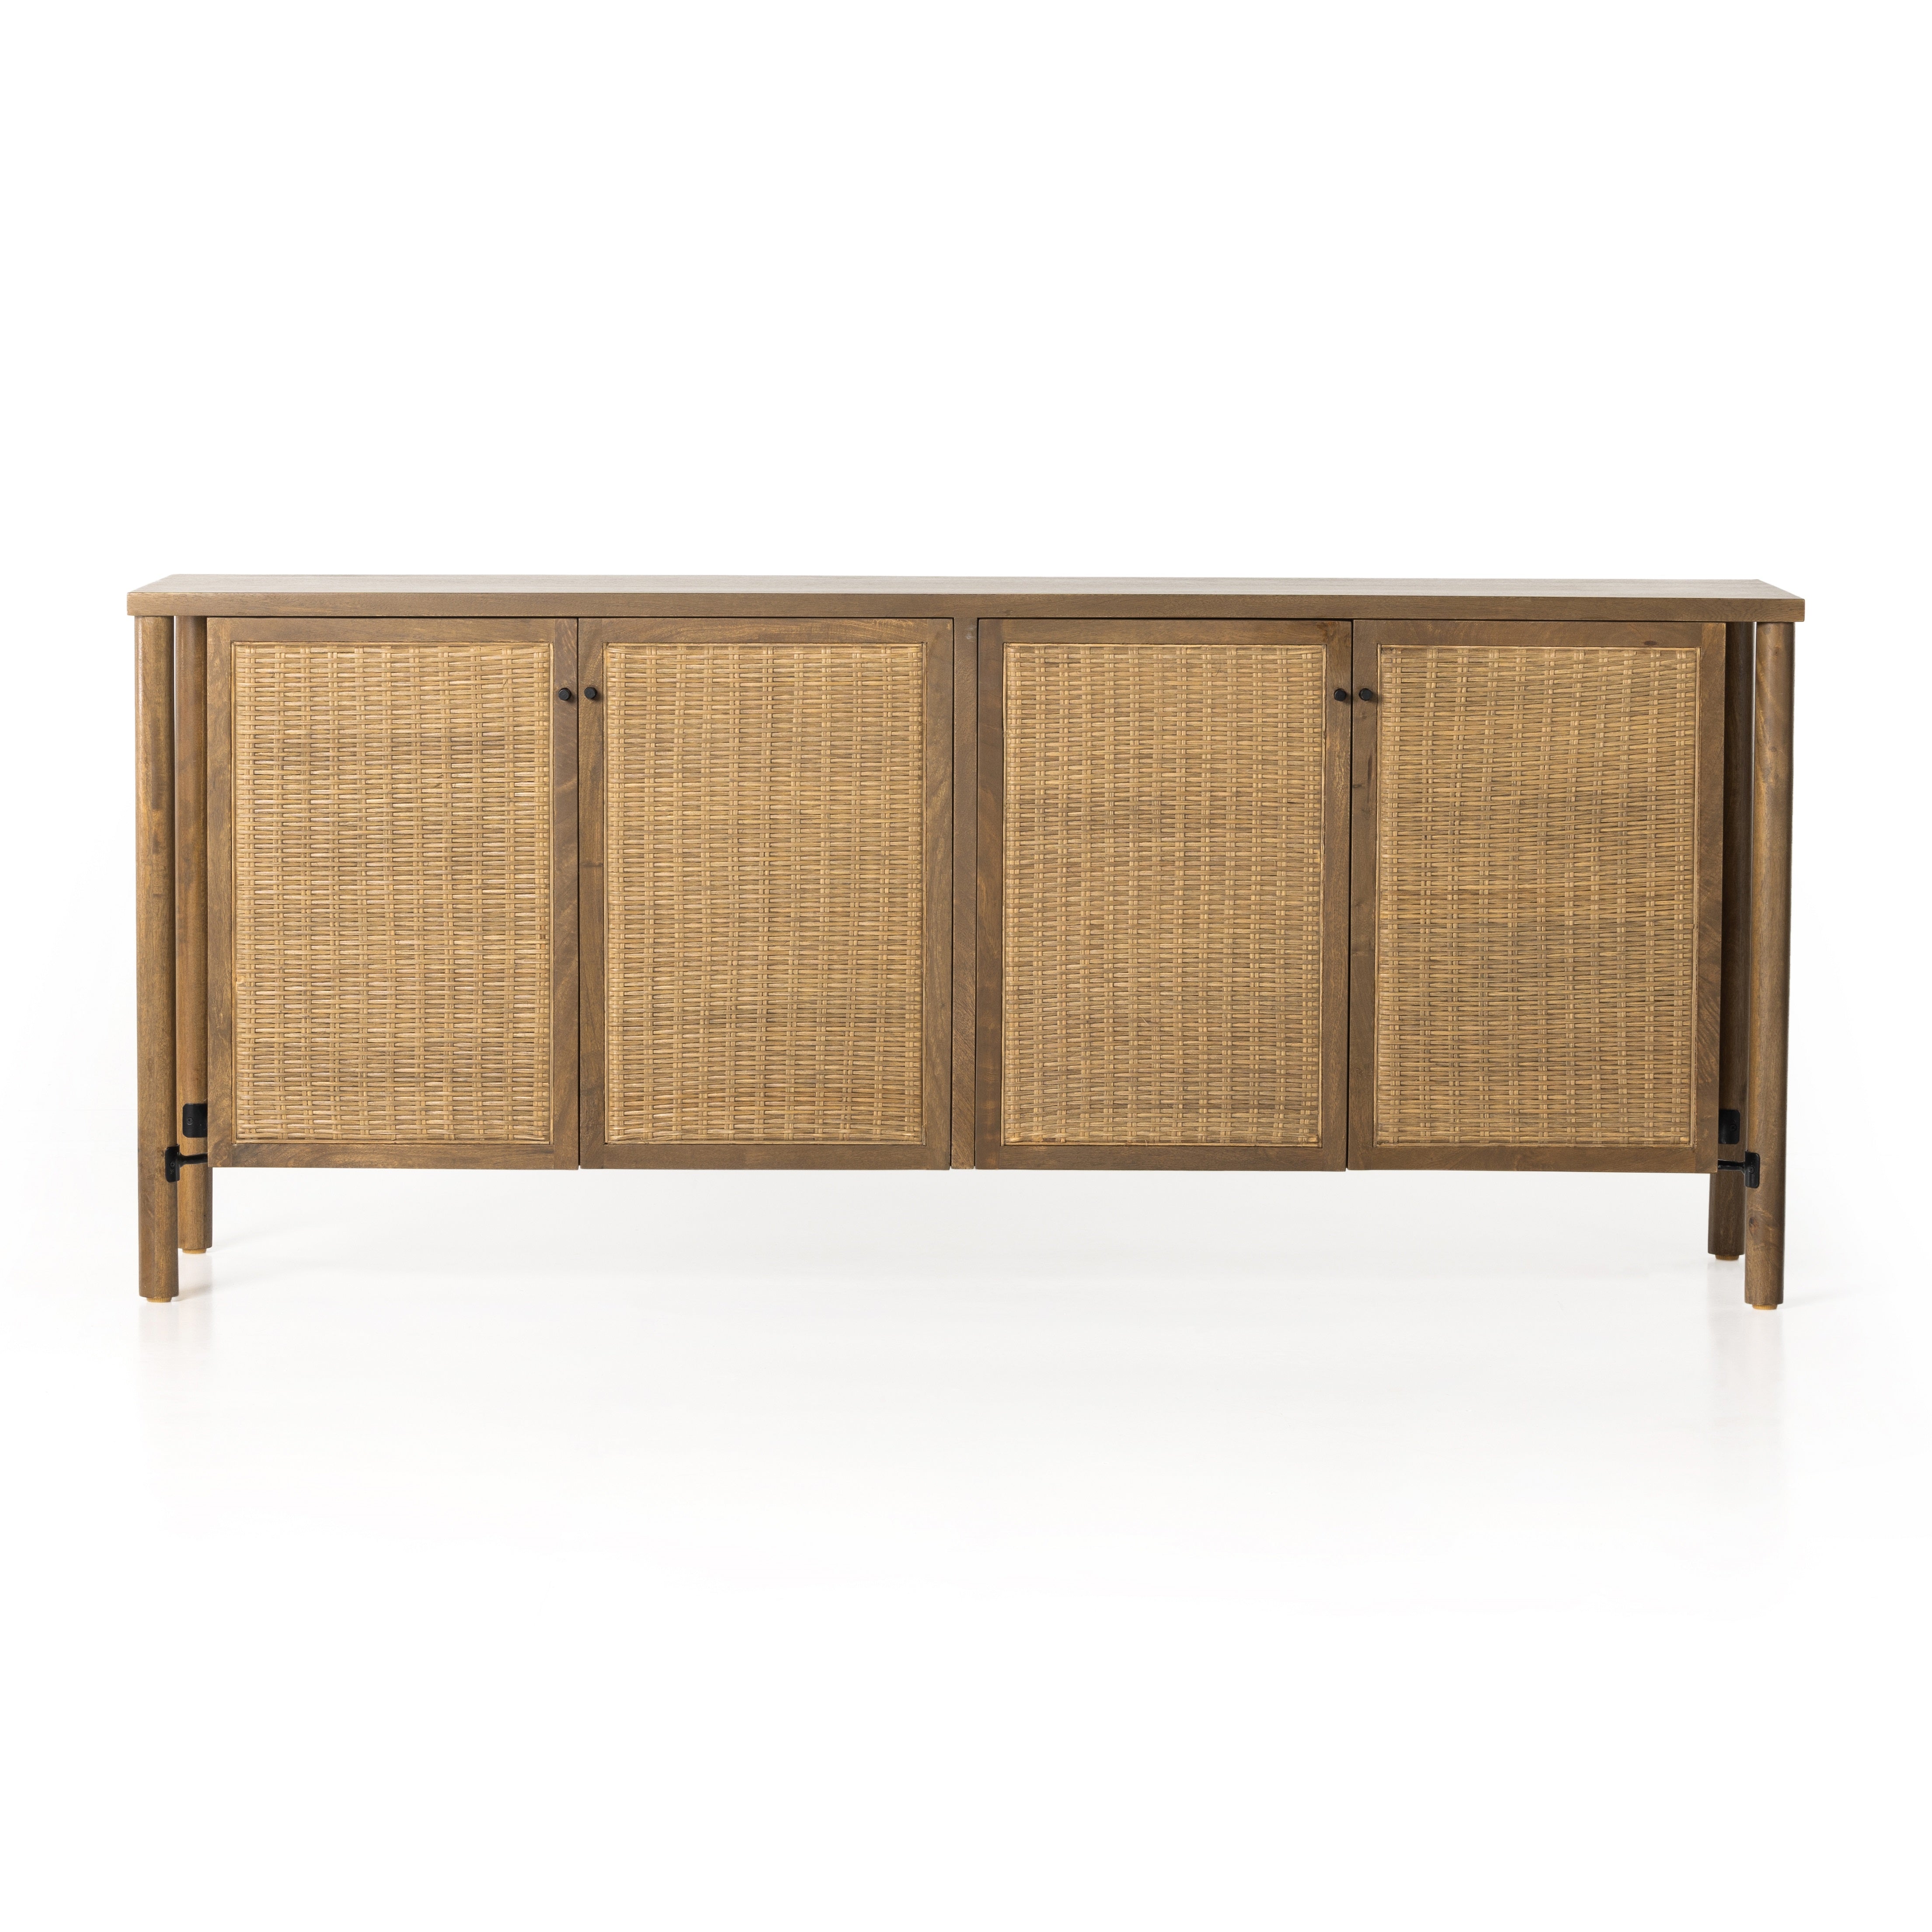 The Veta Taupe Cane Sideboard's modern weave pattern refreshes an ever-trending material. Solid mango encases cane door fronts with a unique taupe finish and textural basket weave. Dowel legs separate from casing for a float-like look. Spacious interior perfect for storing table linens and serveware. Amethyst Home provides interior design services, furniture, rugs, and lighting in the Calabasas metro area. 